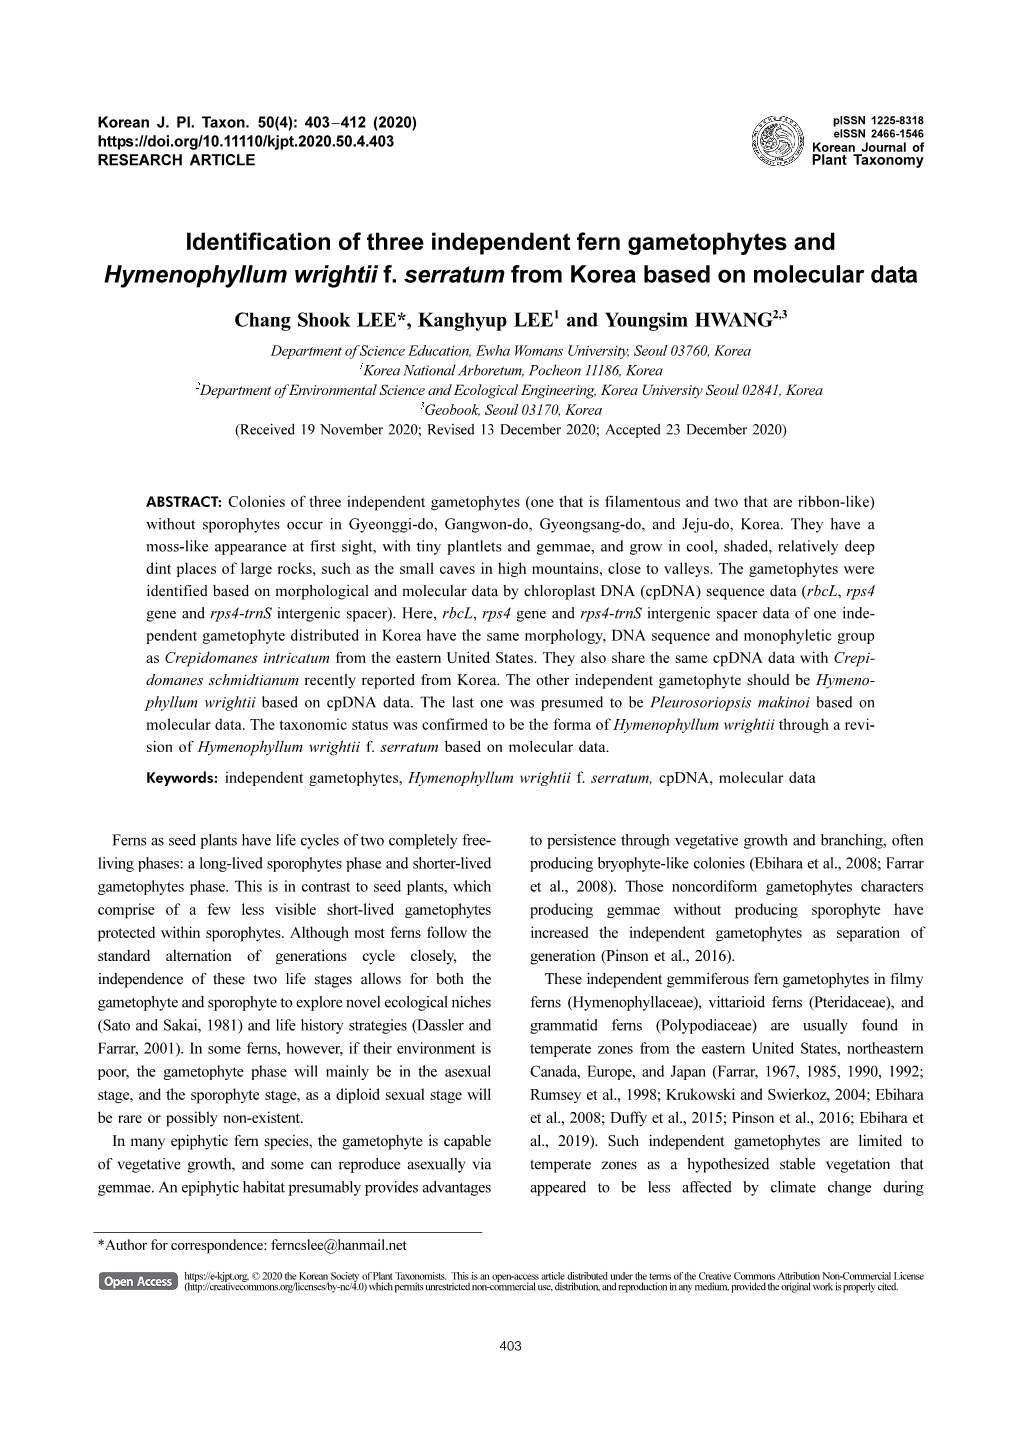 Identification of Three Independent Fern Gametophytes and Hymenophyllum Wrightii F